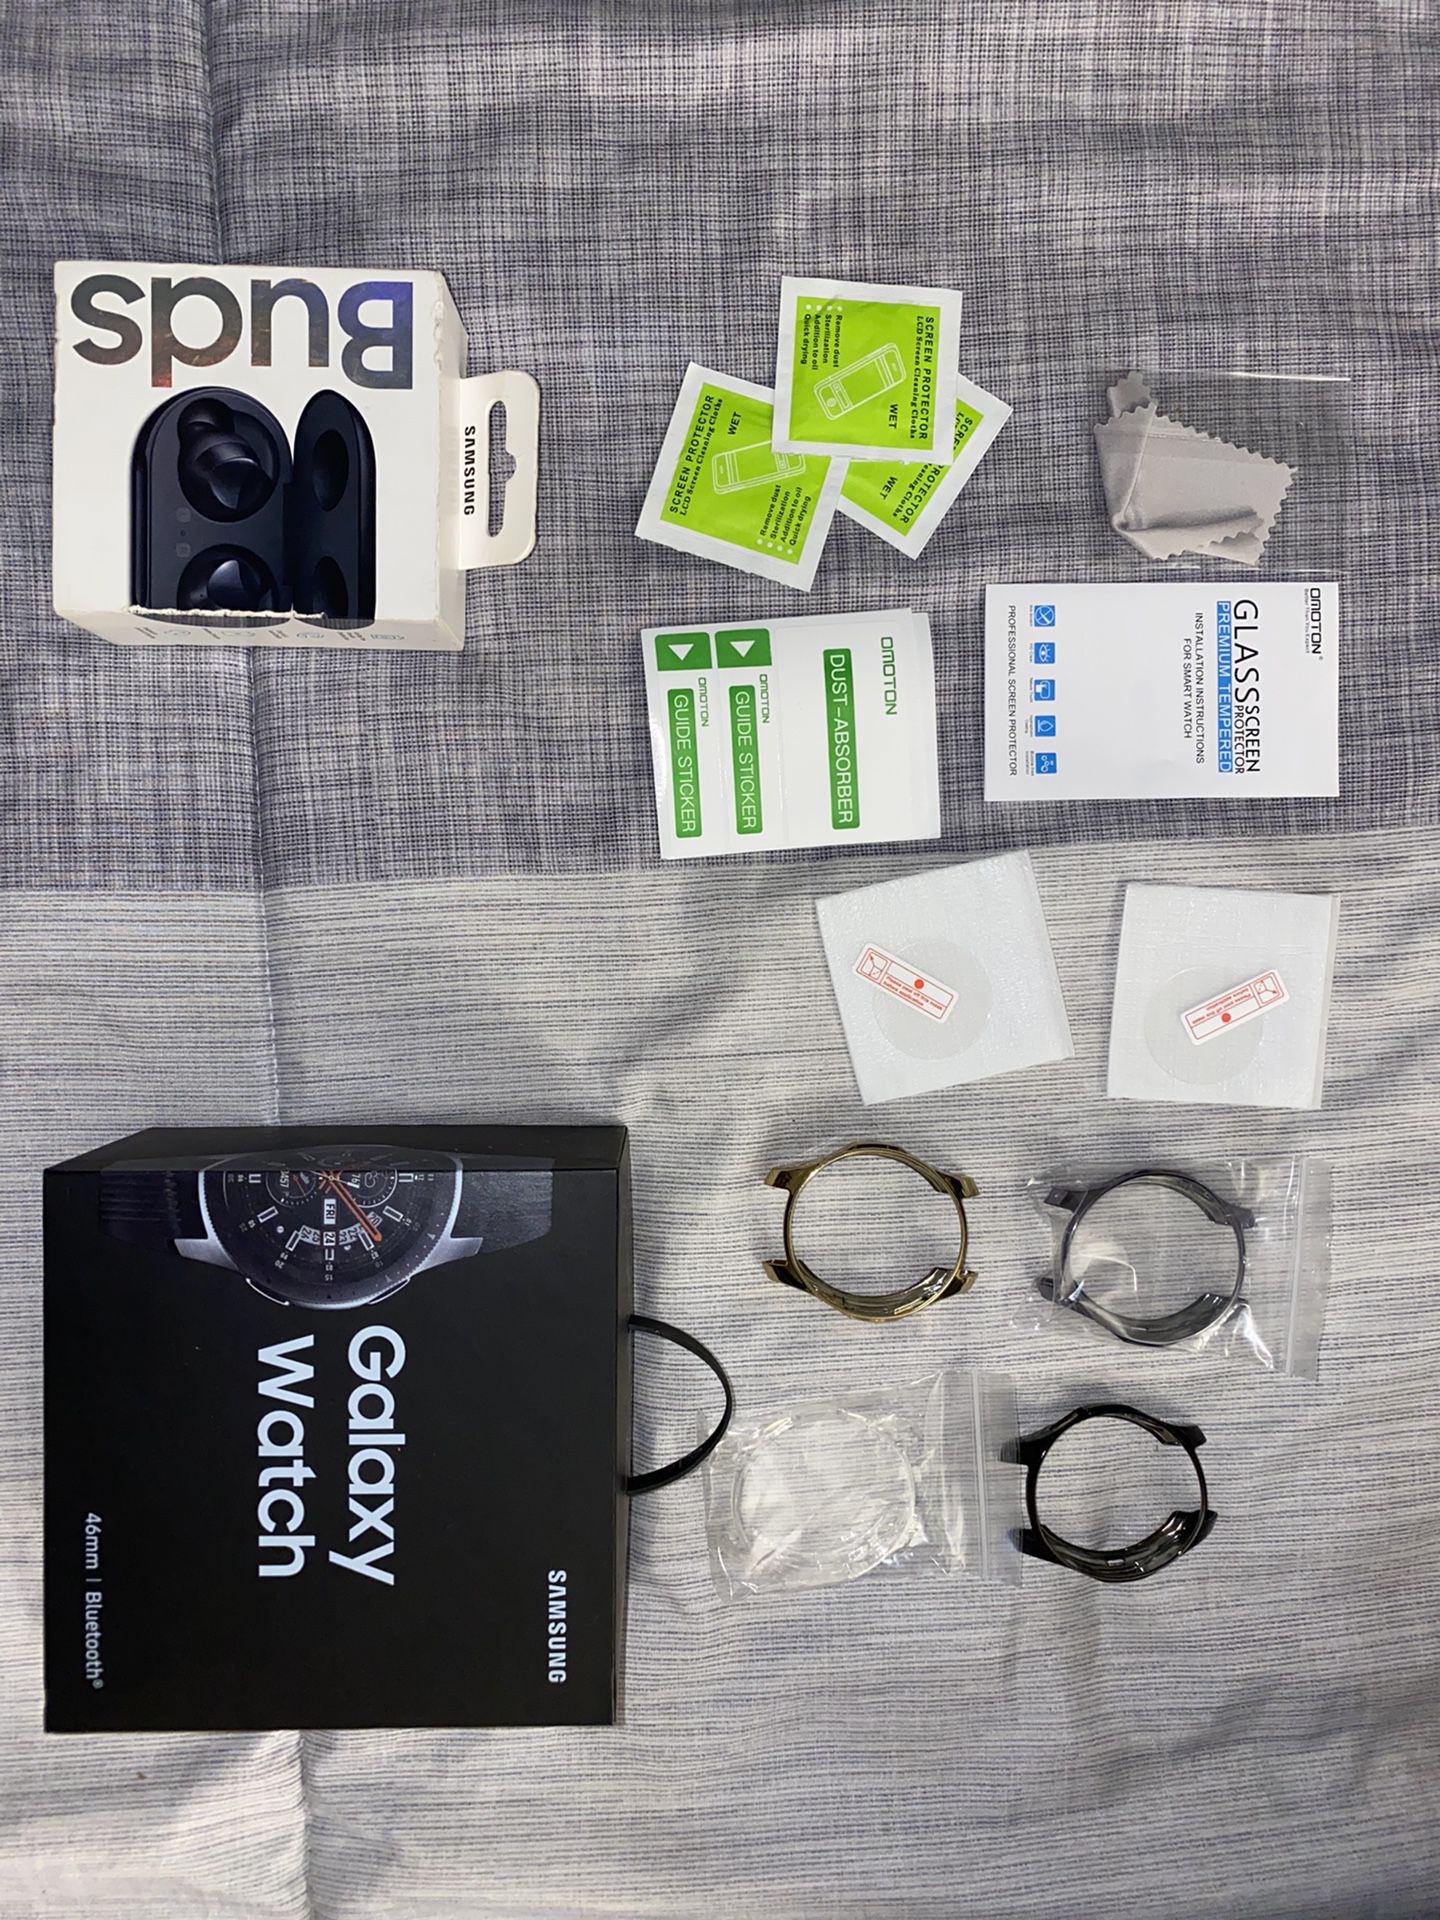 Samsung Buds and Samsung galaxy Watch 46mm with accessories